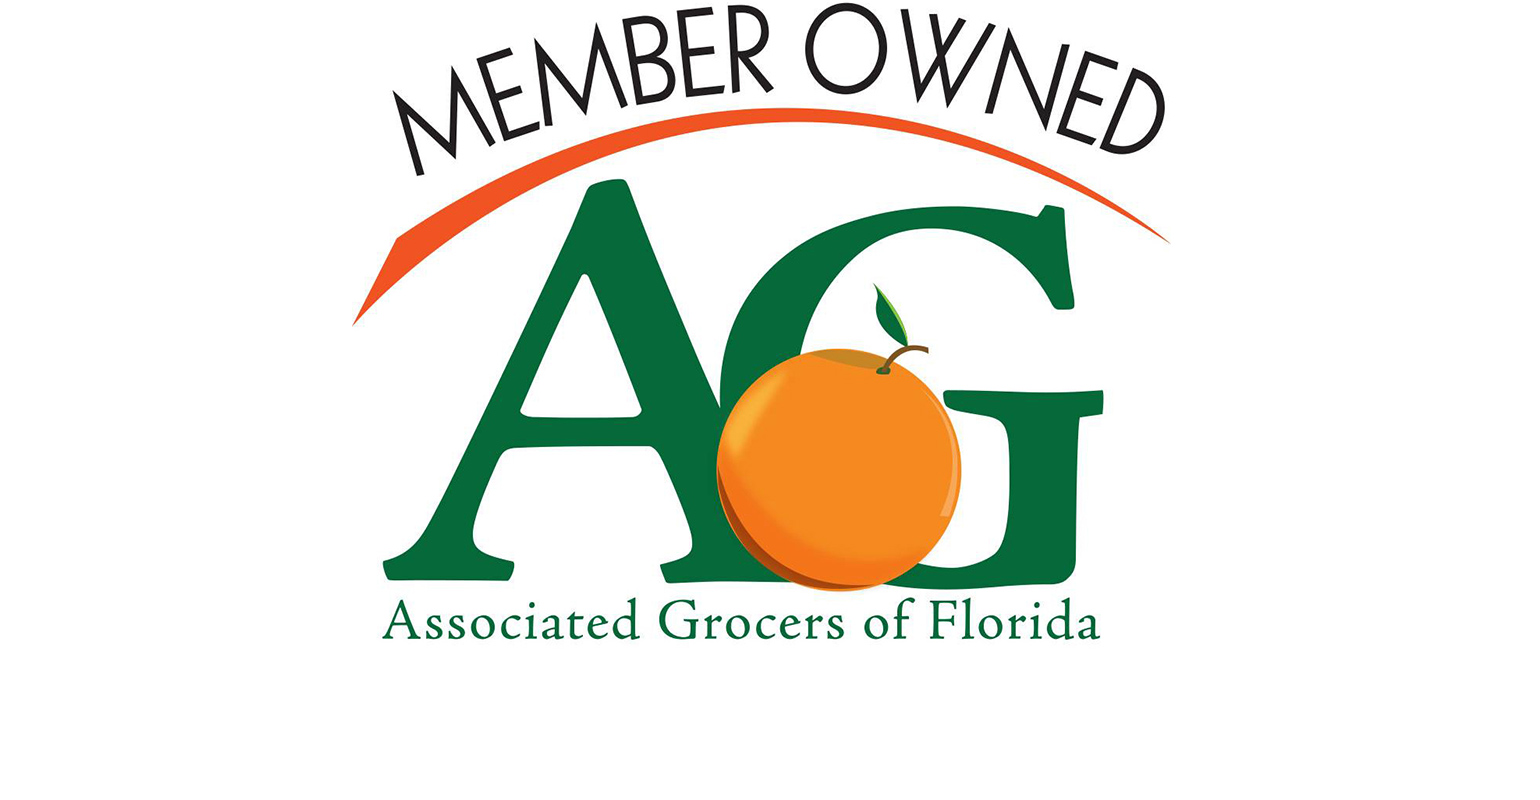 Associated Grocers Of Florida